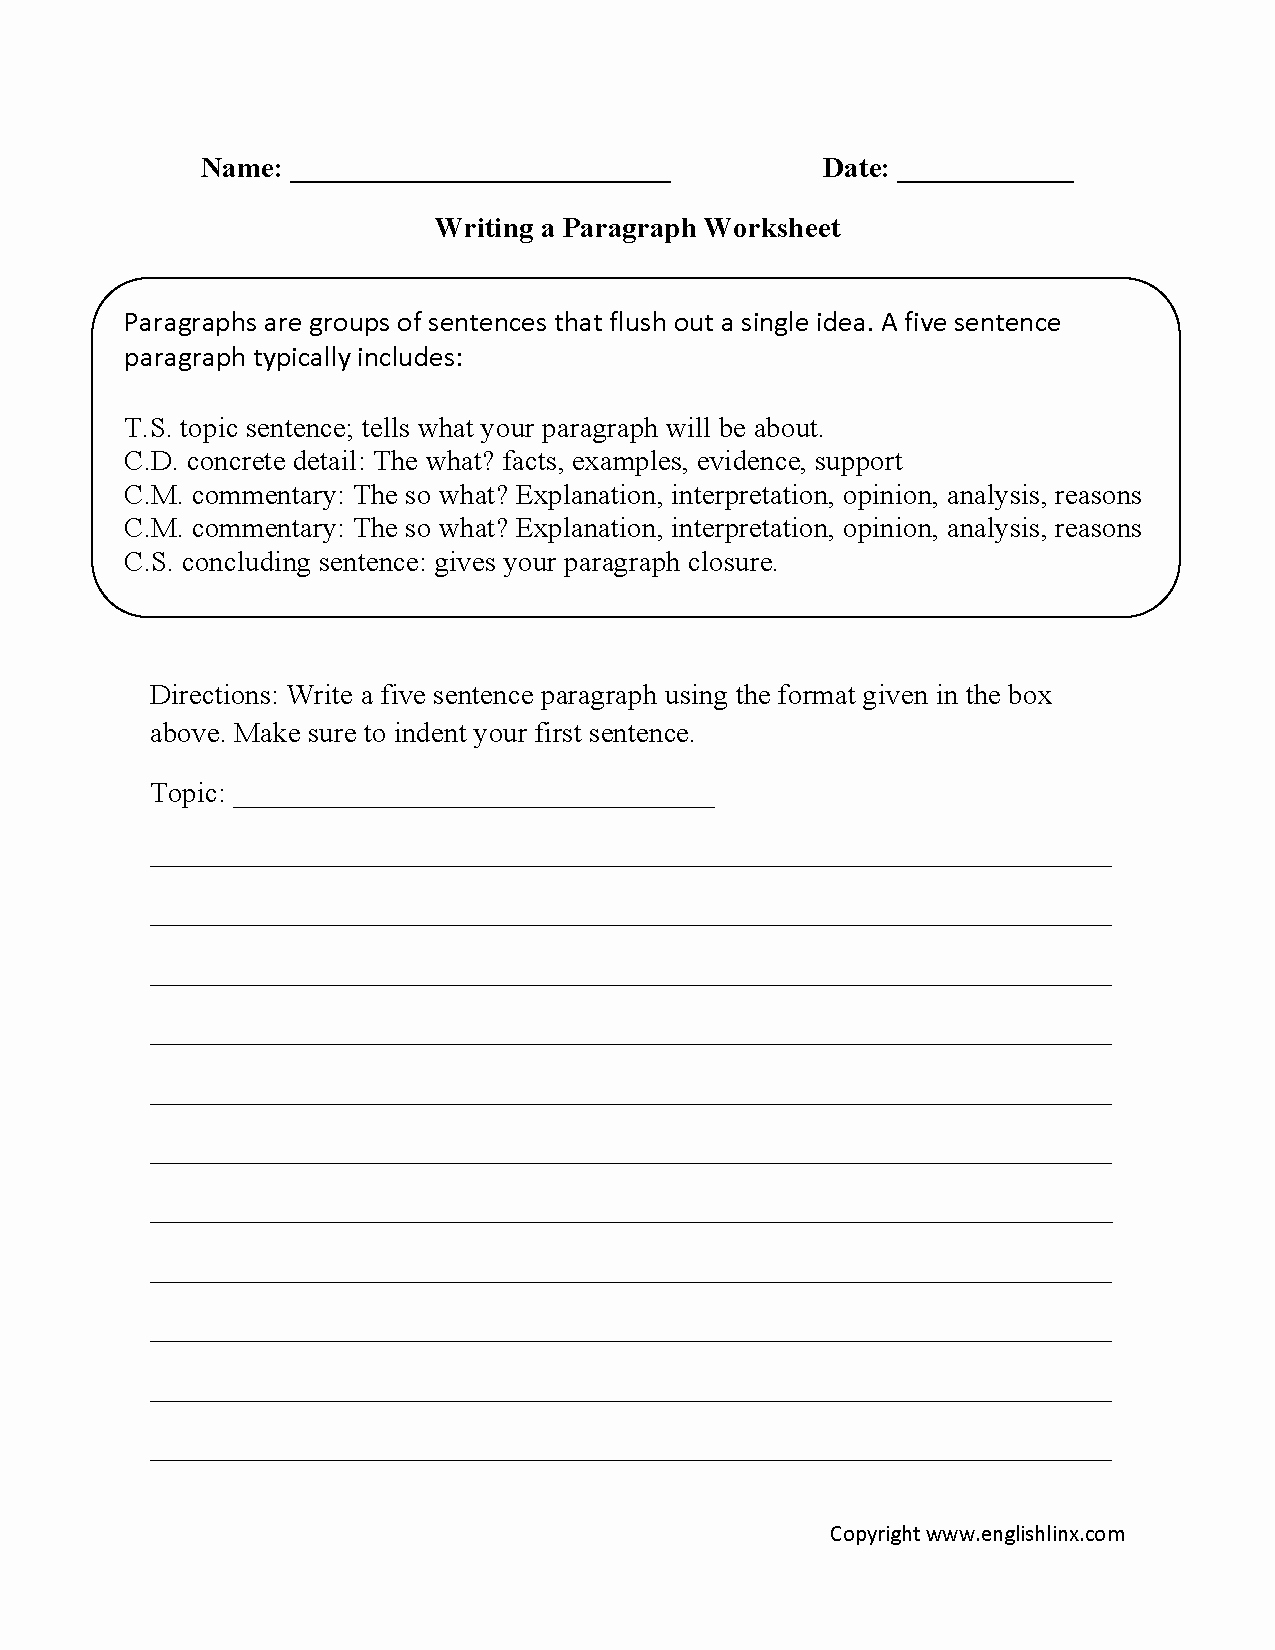 Free Paragraph Writing Worksheets Awesome Writing Worksheets